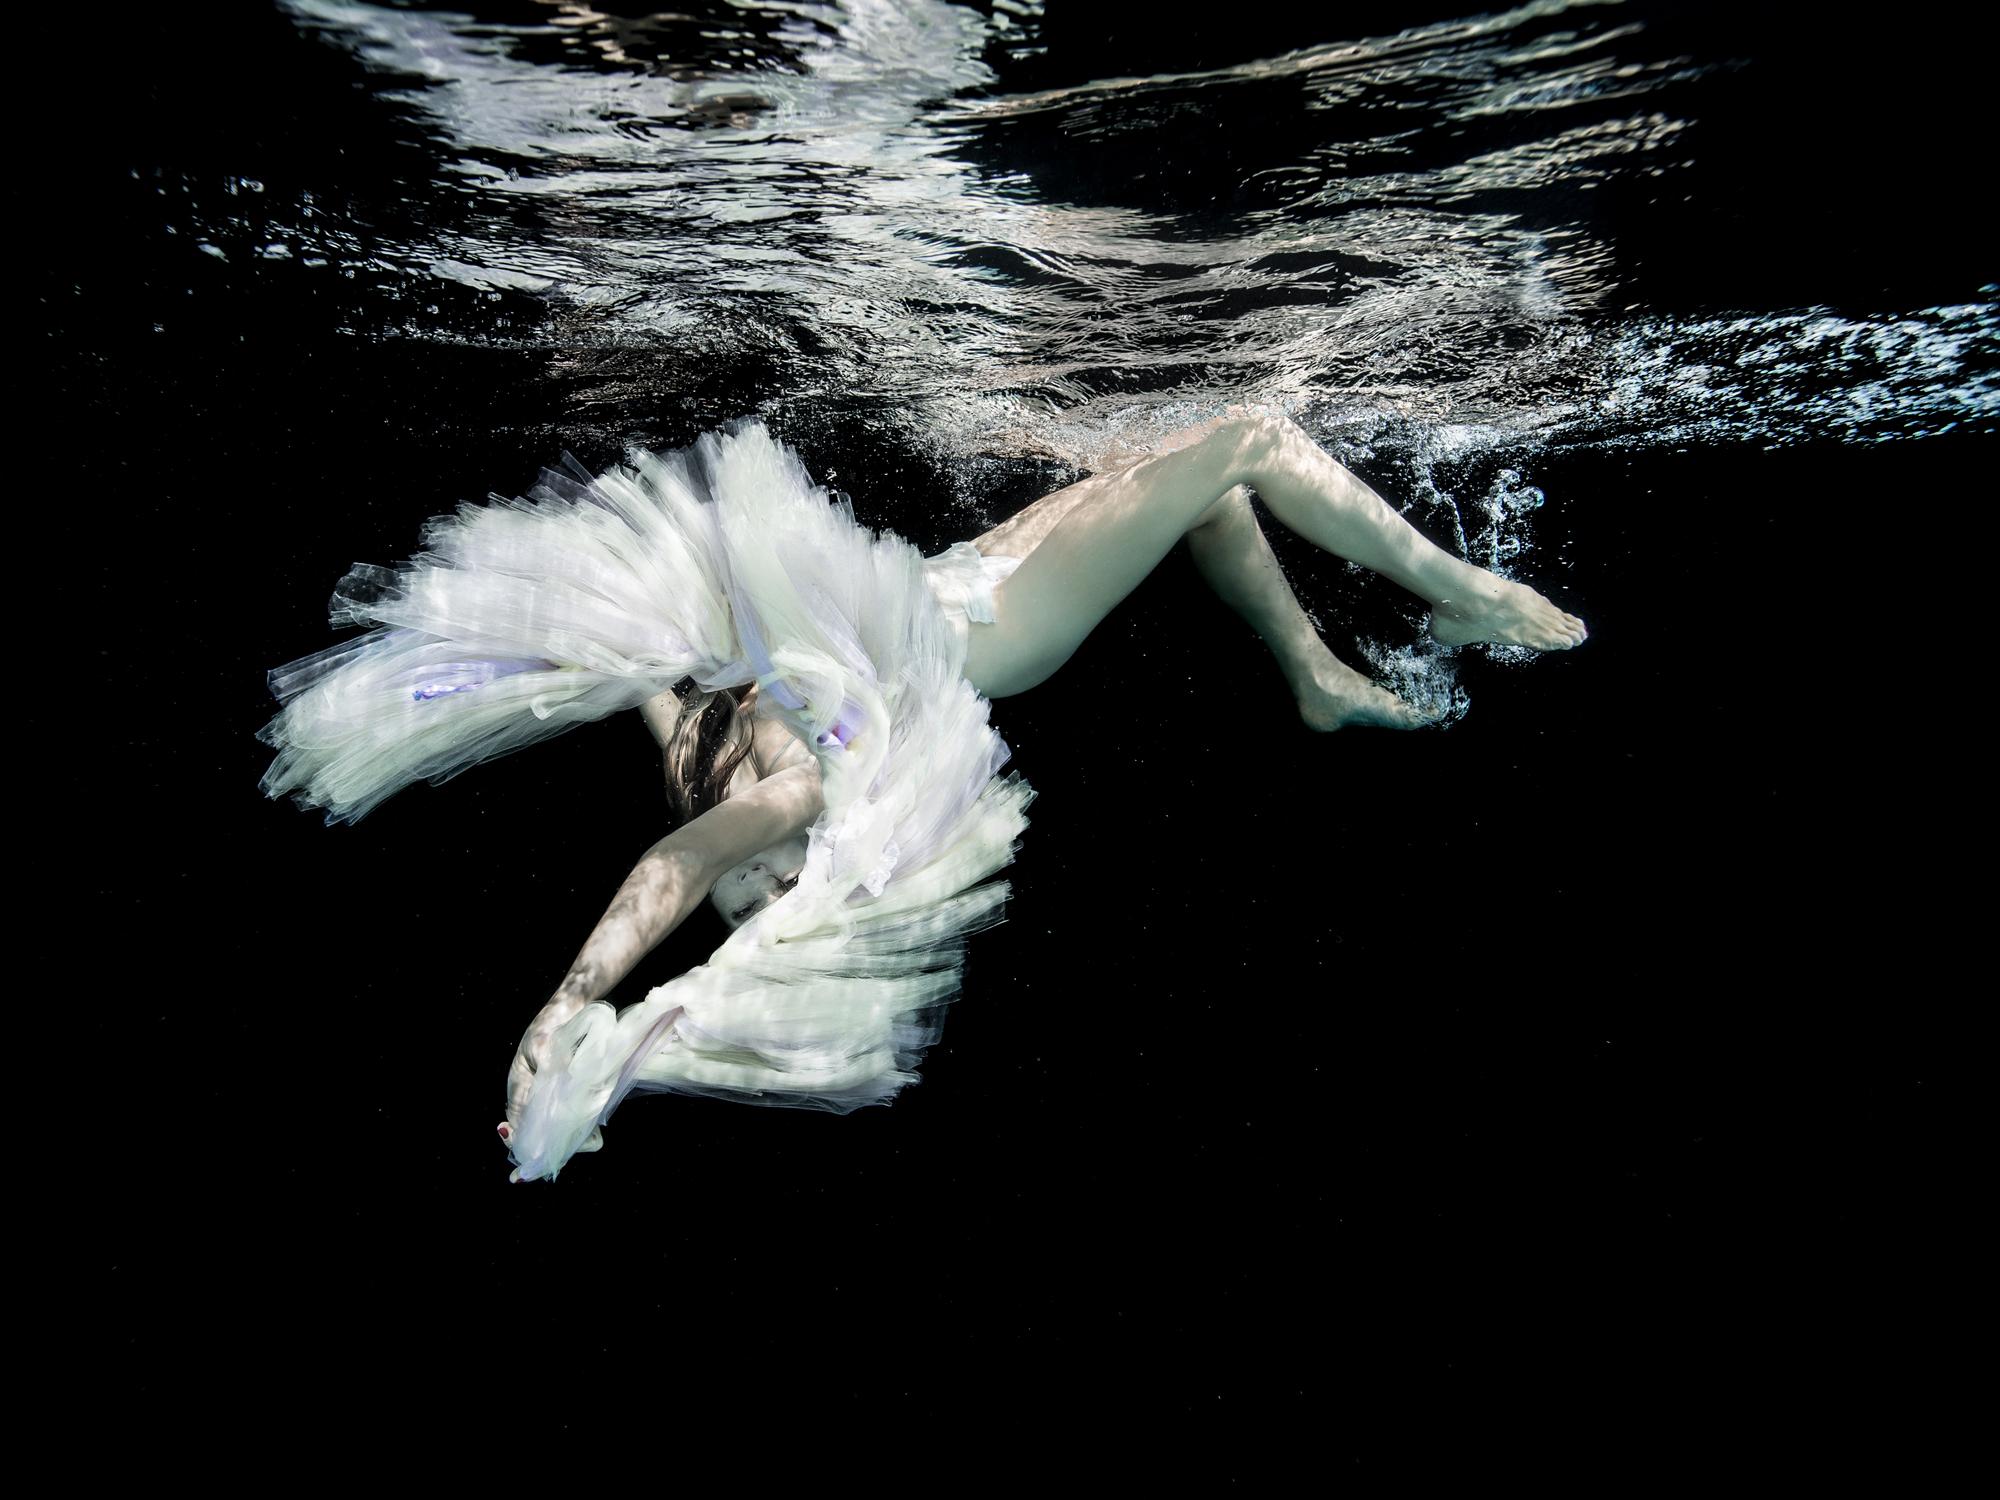 Ballet - underwater black and white nude photograph print on paper 42" x 56"